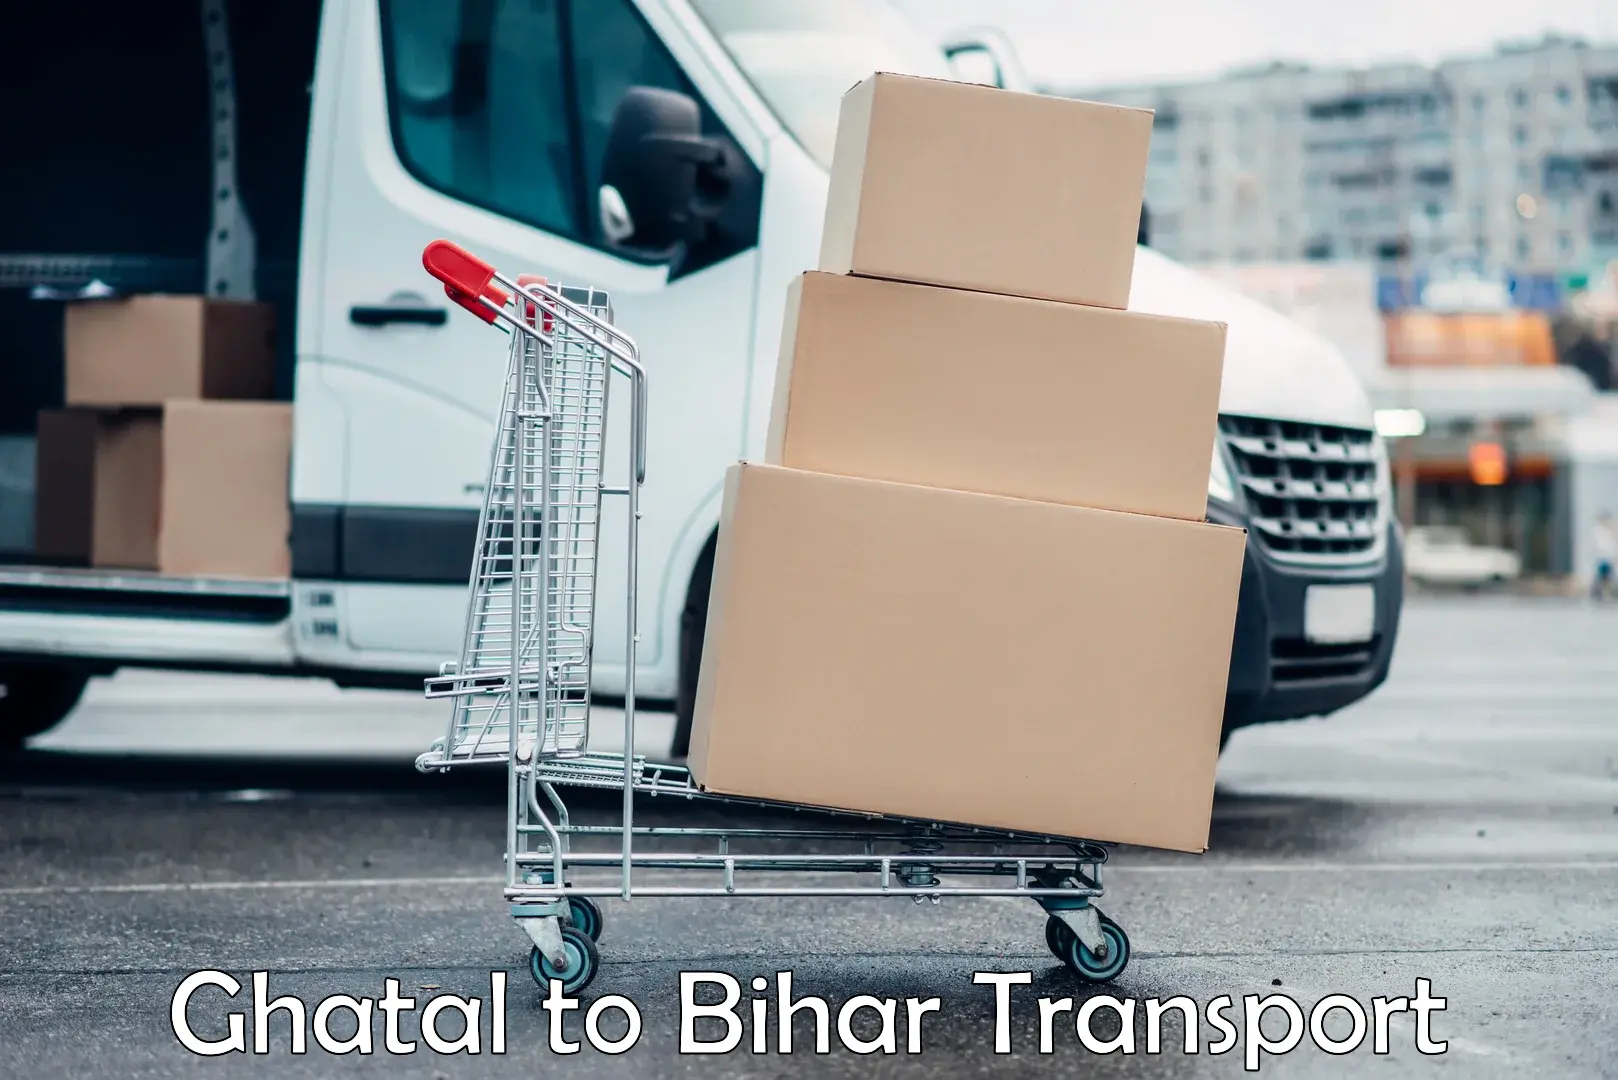 Goods delivery service Ghatal to Darbhanga